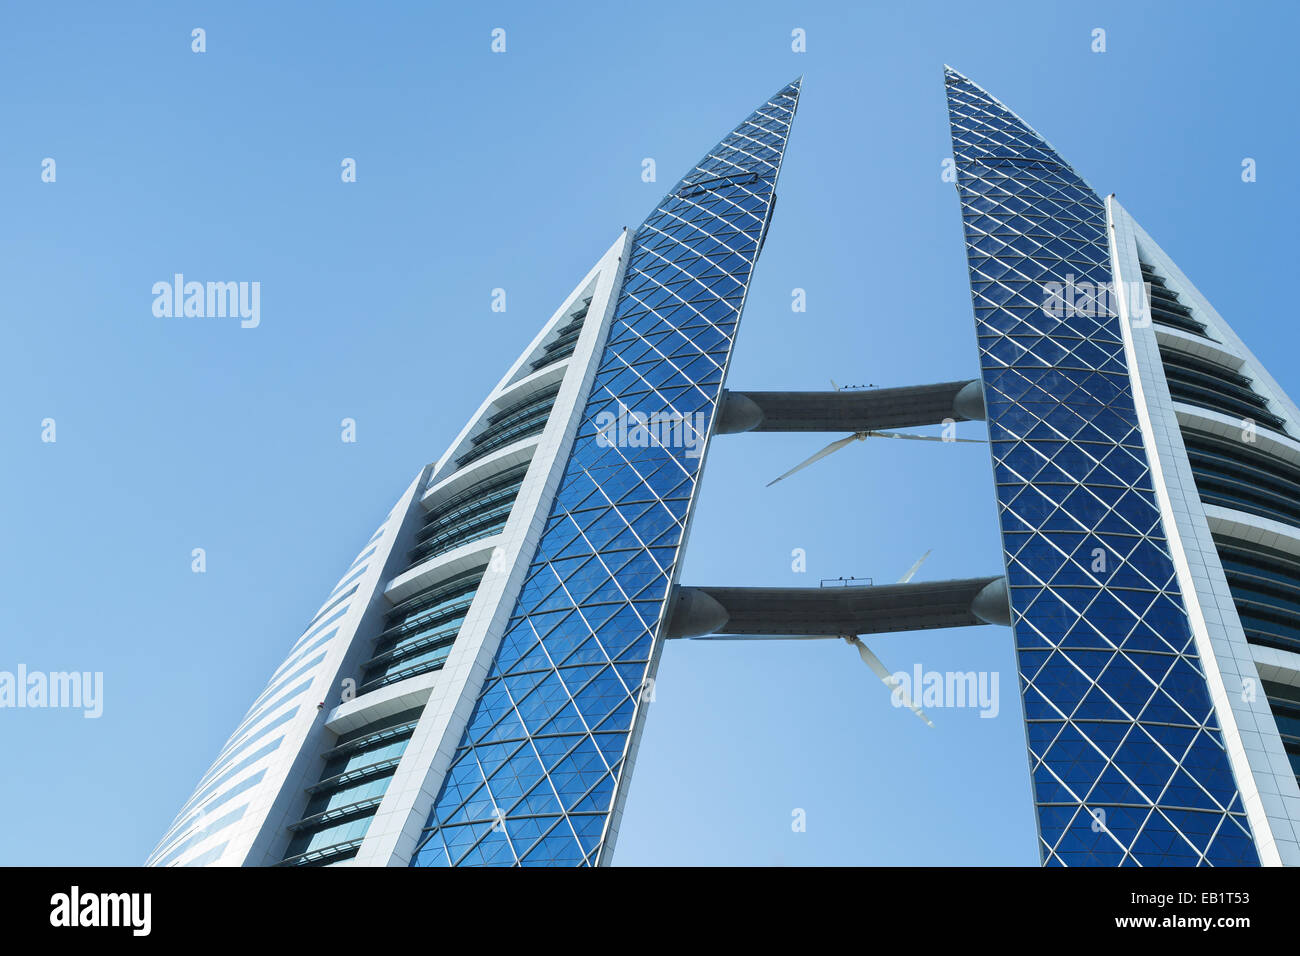 Manama, Bahrain - November 21, 2014: Bahrain World Trade Center complex, first skyscraper in the world with integrated wind turb Stock Photo